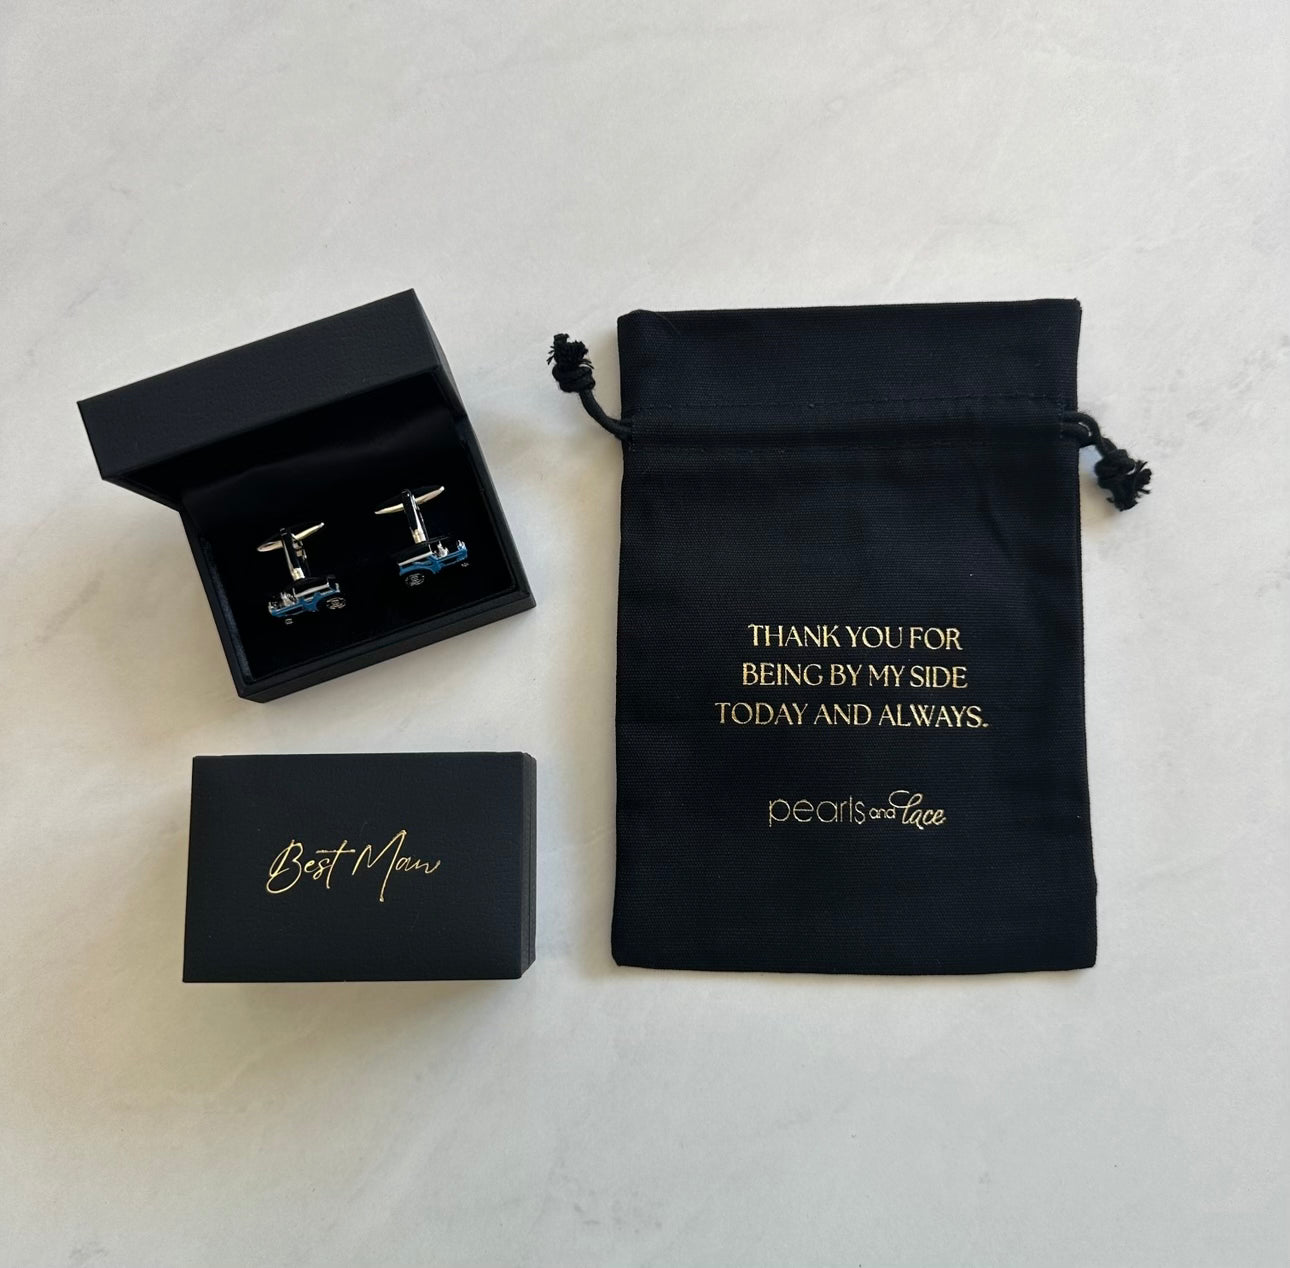 Drinking Arm and Reserved Arm - Cufflinks